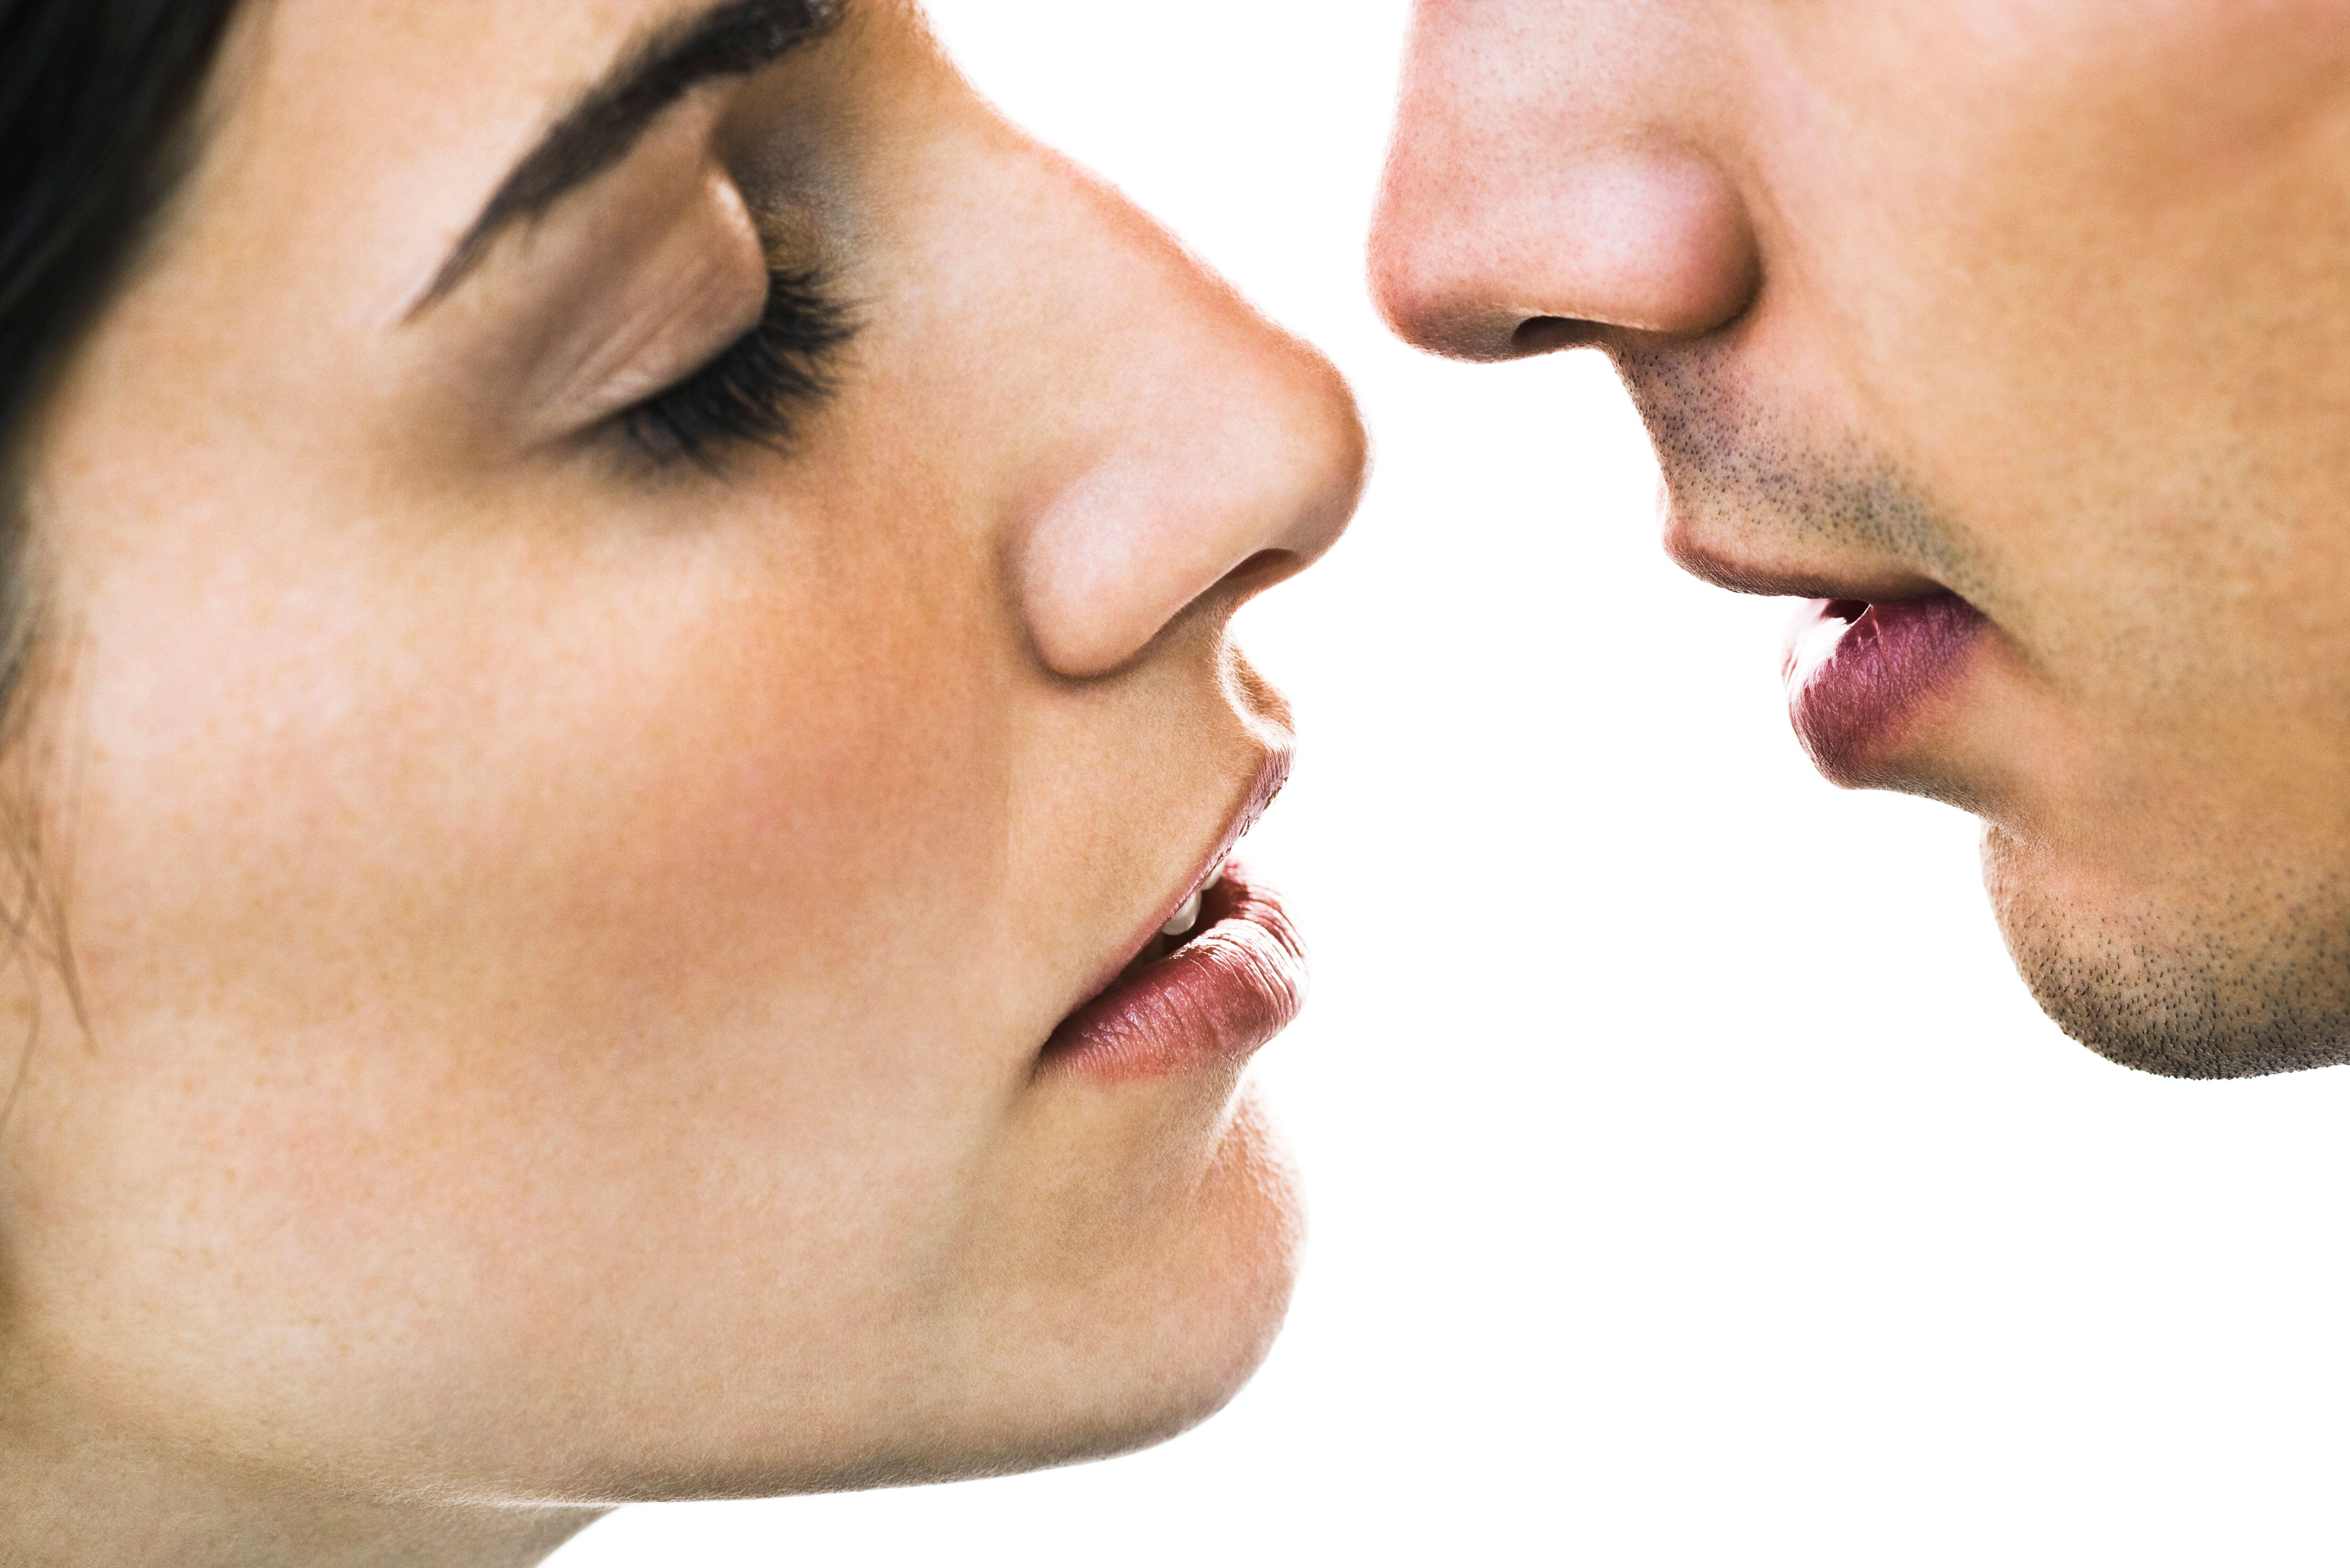 Men Can Smell When Women Are Aroused Research photo